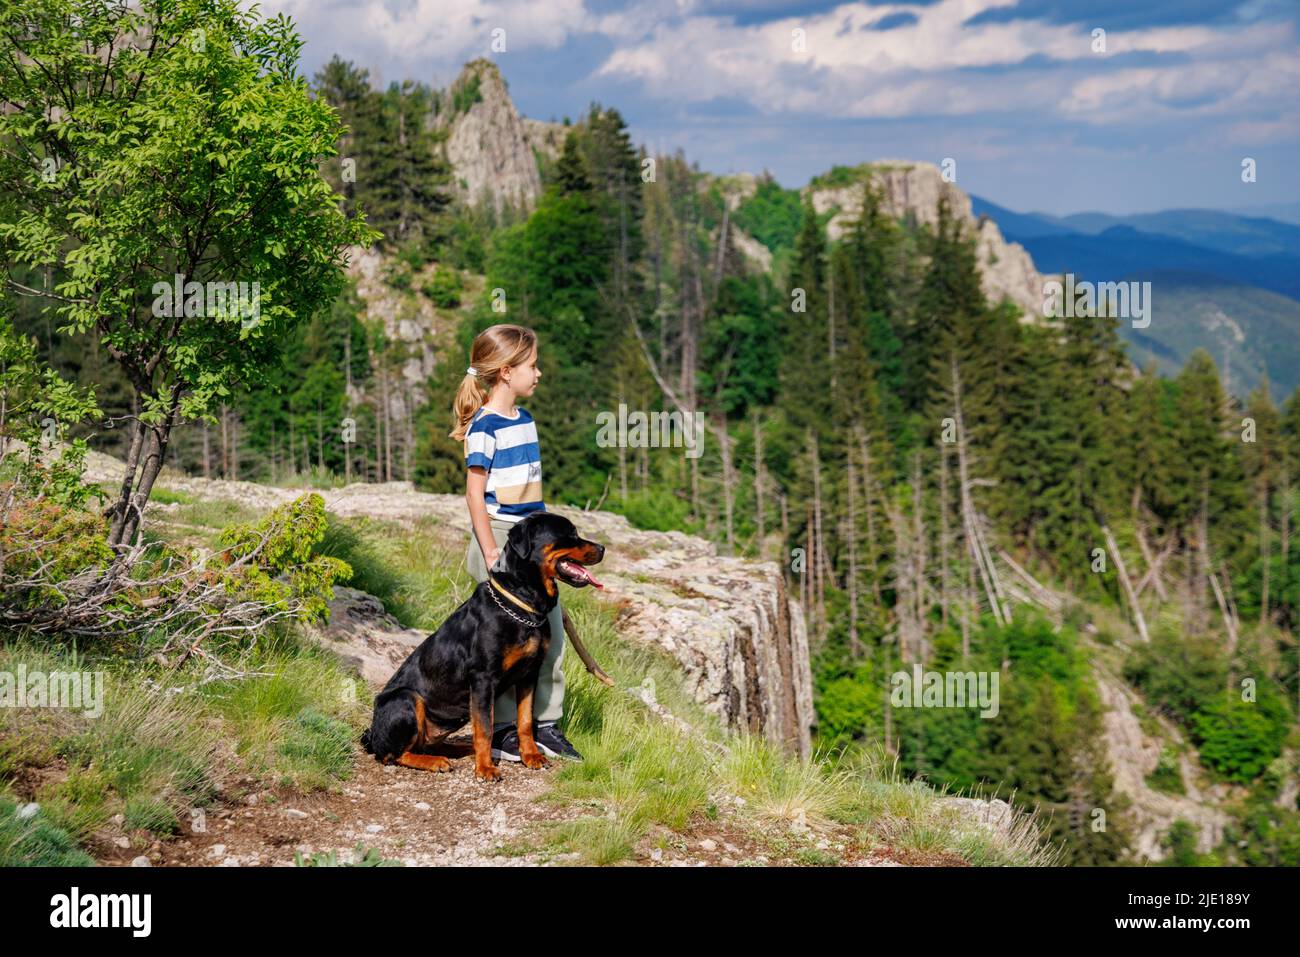 A little pensive dreamy girl with blond hair stands next to her big obedient faithful dog of the Rottweiler breed on a high rocky peak with mountain v Stock Photo